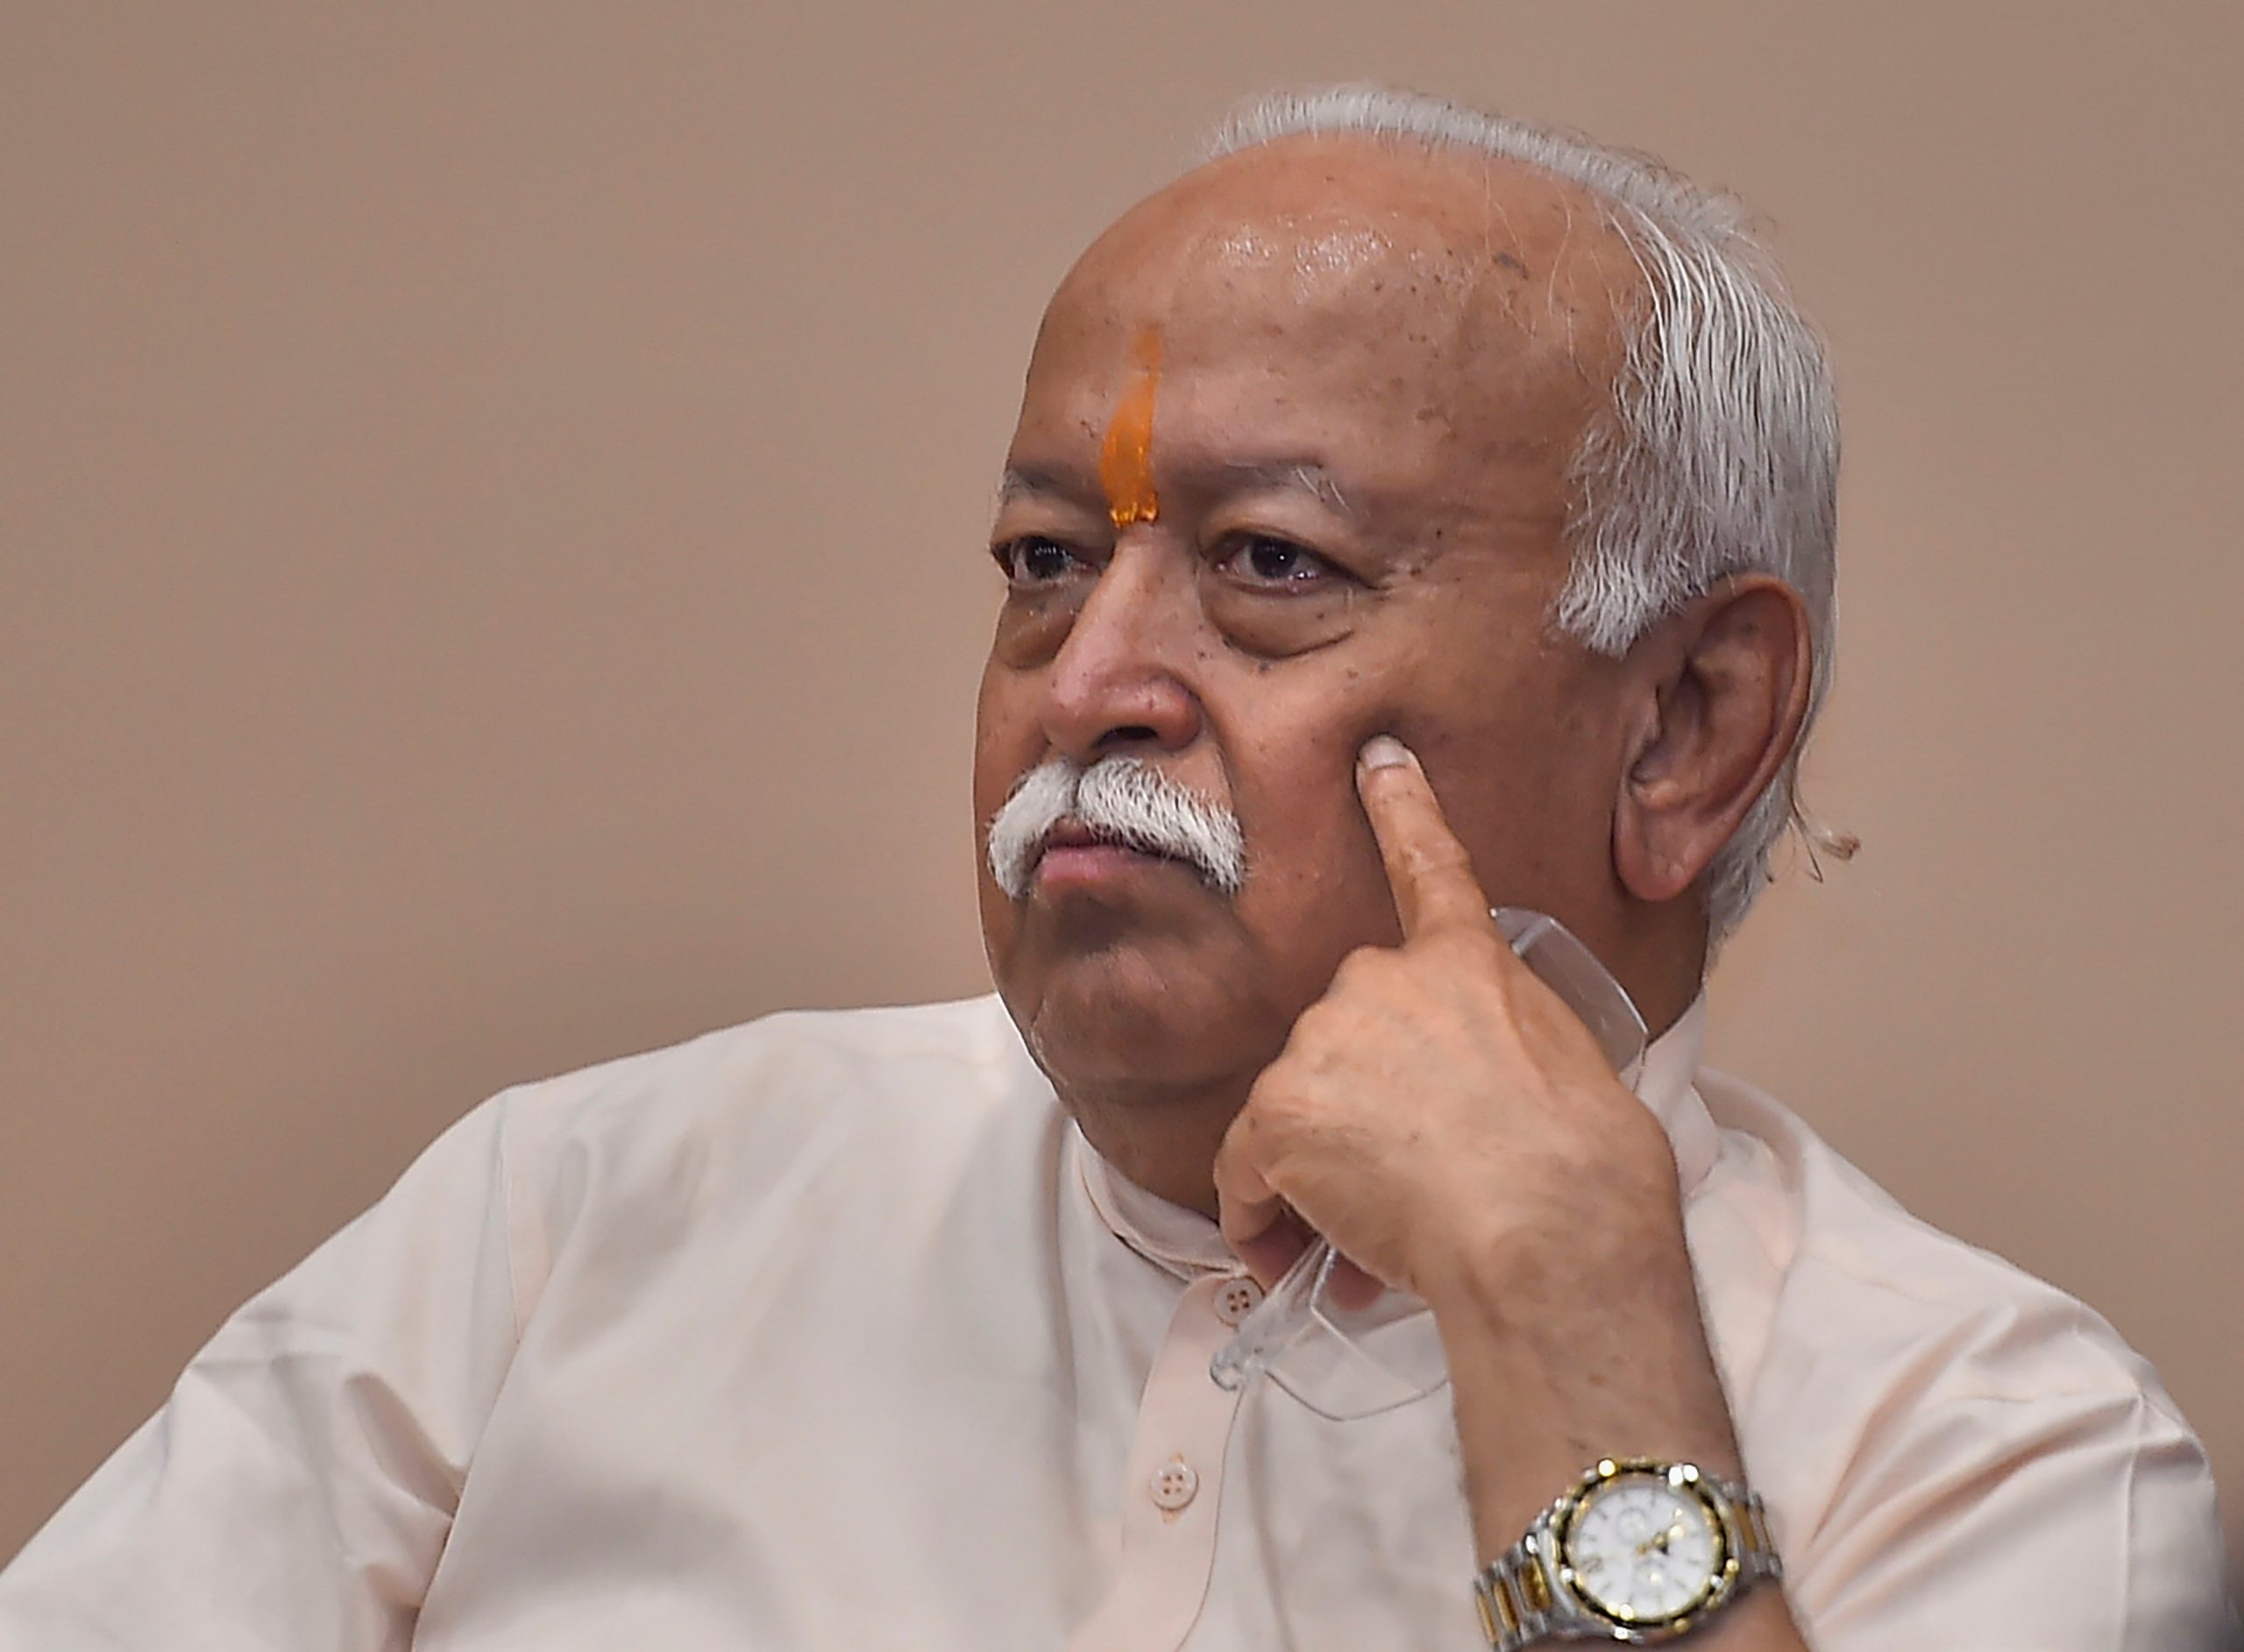 Mohan Bhagwat is rashtra pita: Top Muslim cleric after meeting RSS chief